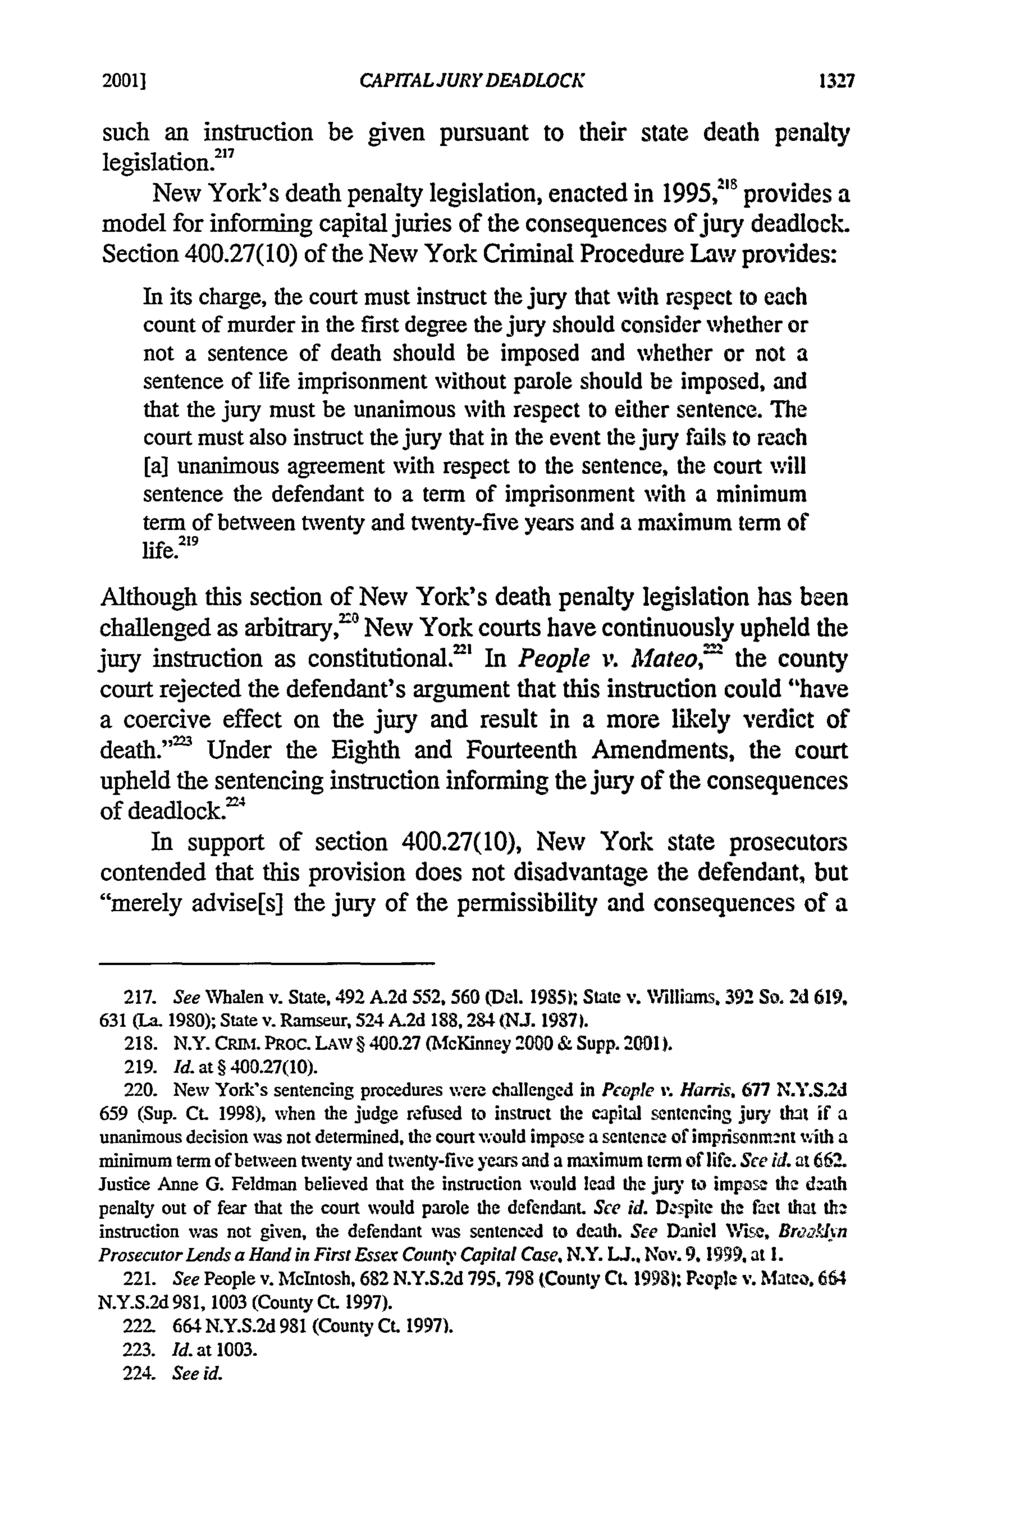 20011 Berberich: Jury Instructions Regarding Deadlock in Capital Sentencing CAPITALJURYDE4DLOCK such an instruction be given pursuant to their state death penalty legislation.